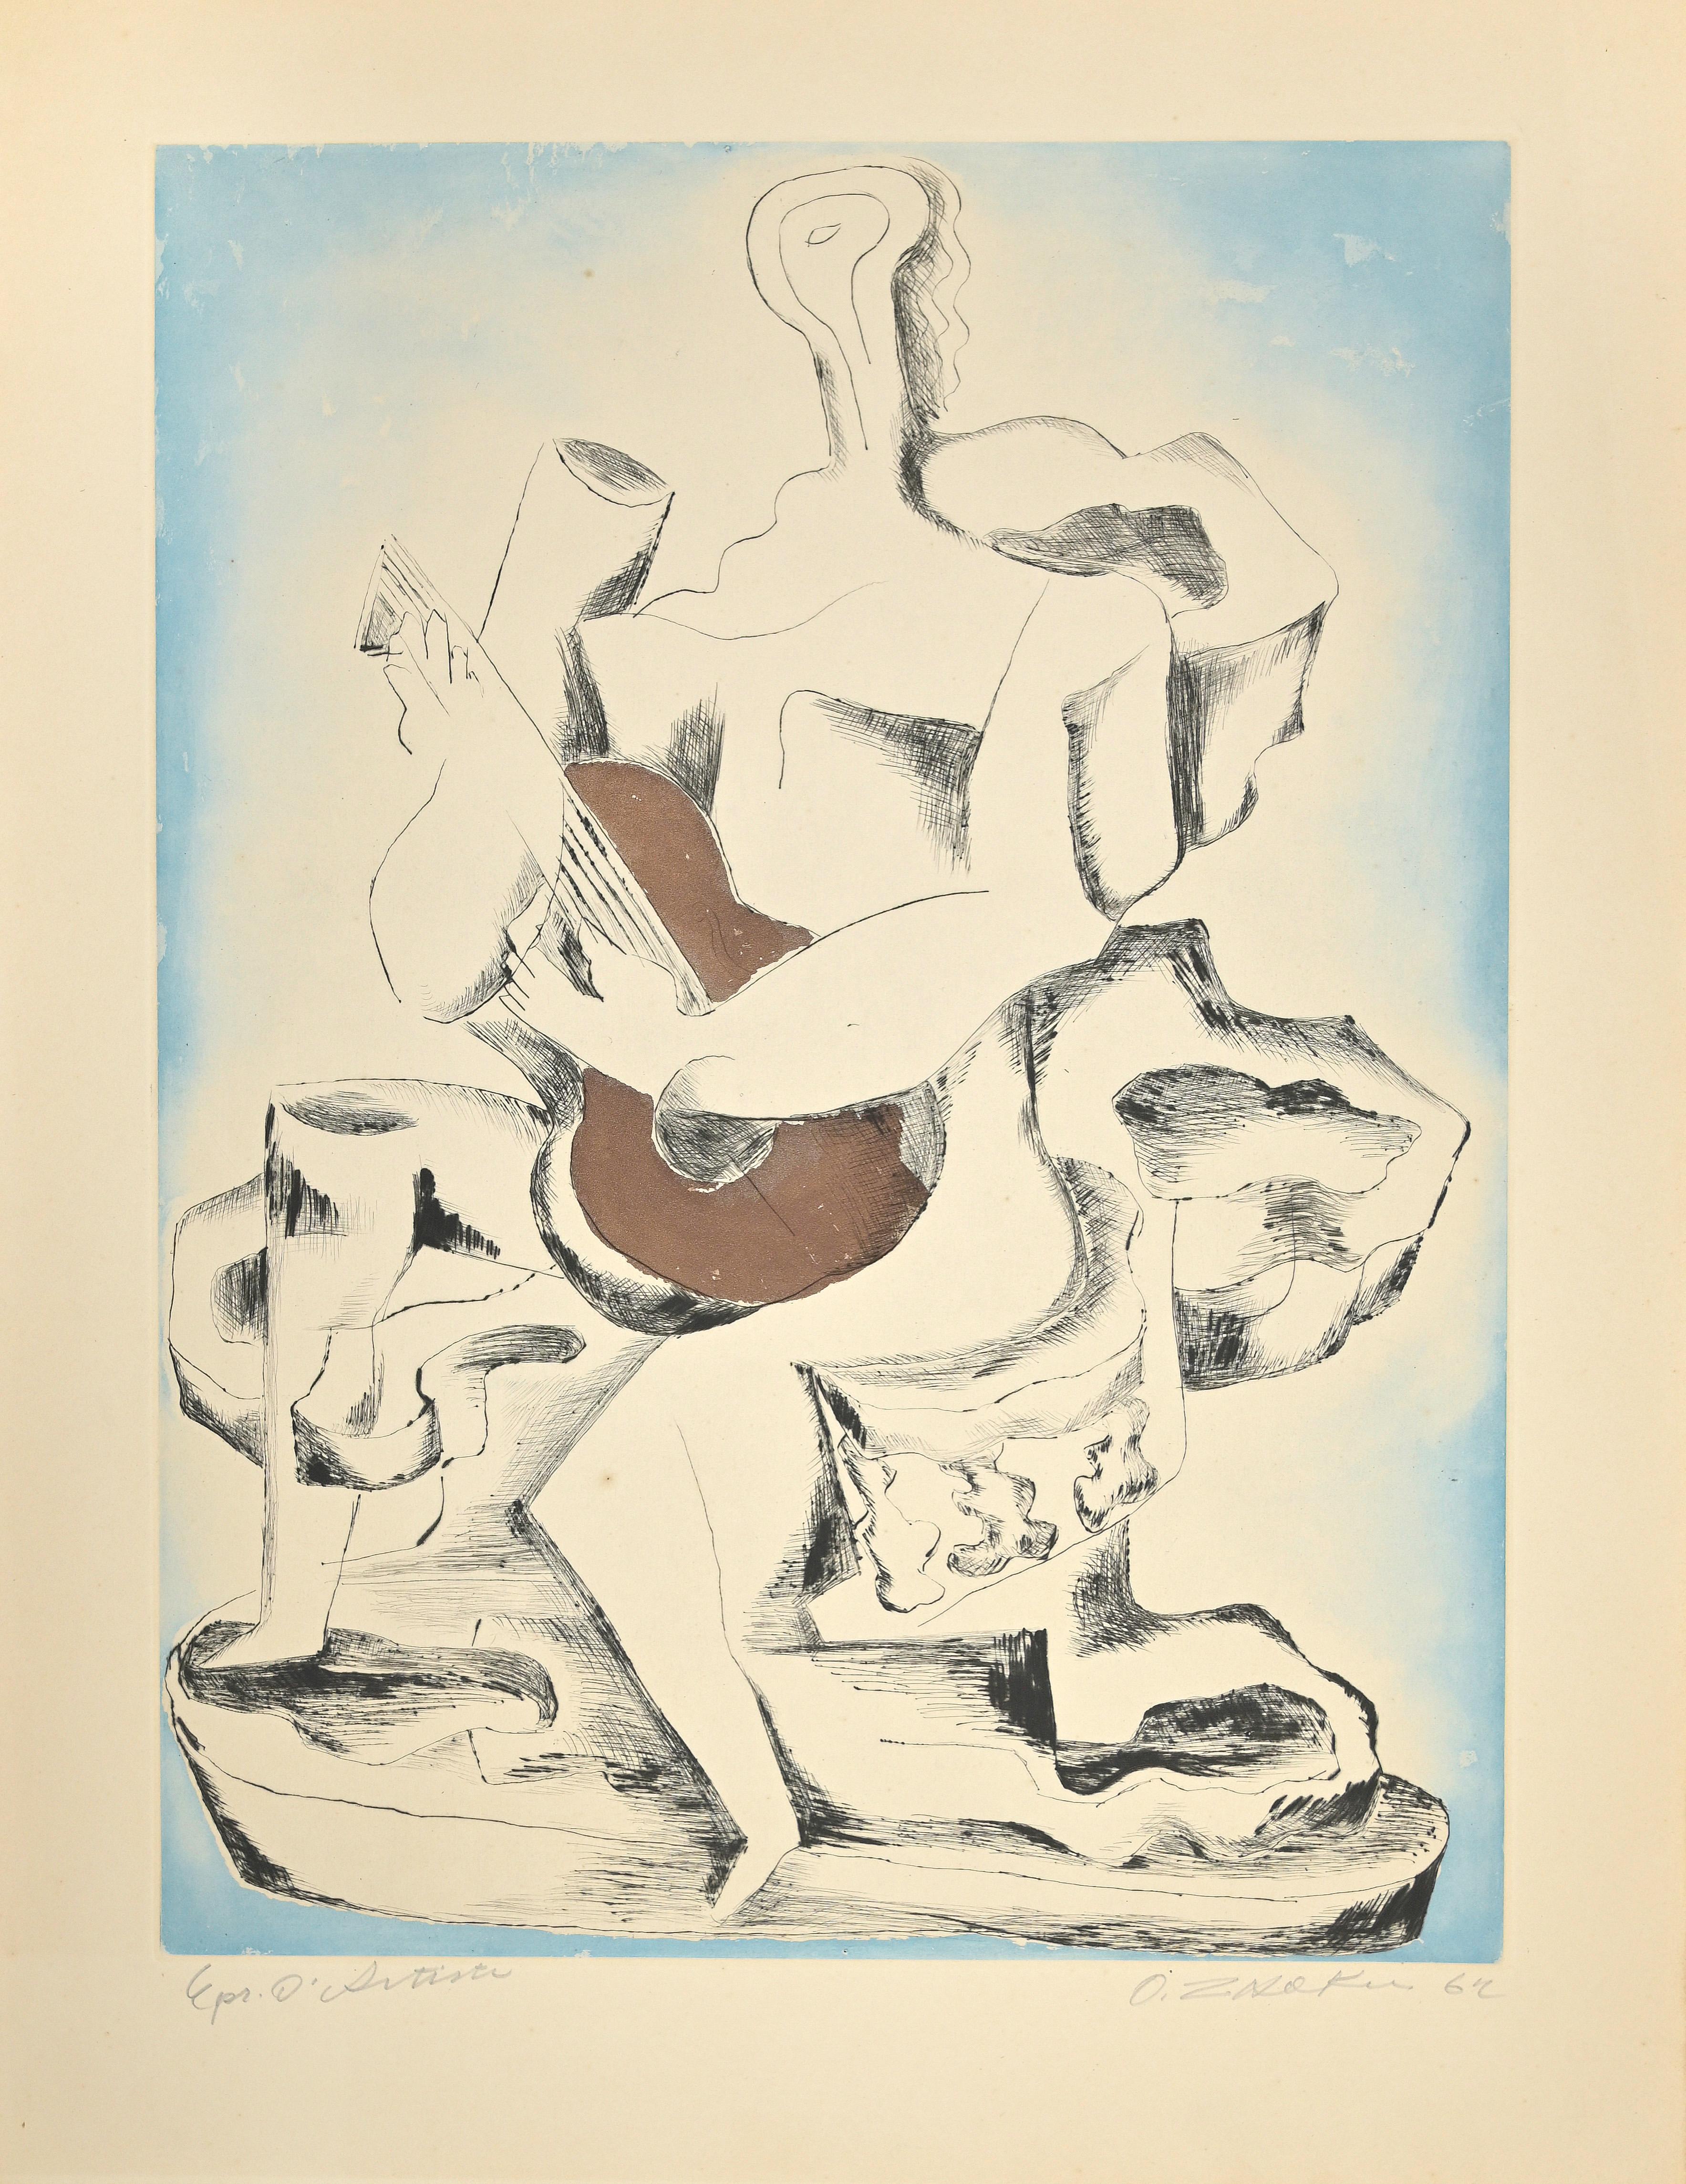 "Femme à la guitare" is an print realized by Ossip Zadkine (Vitebsk 1890 - Paris 1967) in 1962
Color etching - artist's proof.
Hand-signed and dated lower right in pencil.